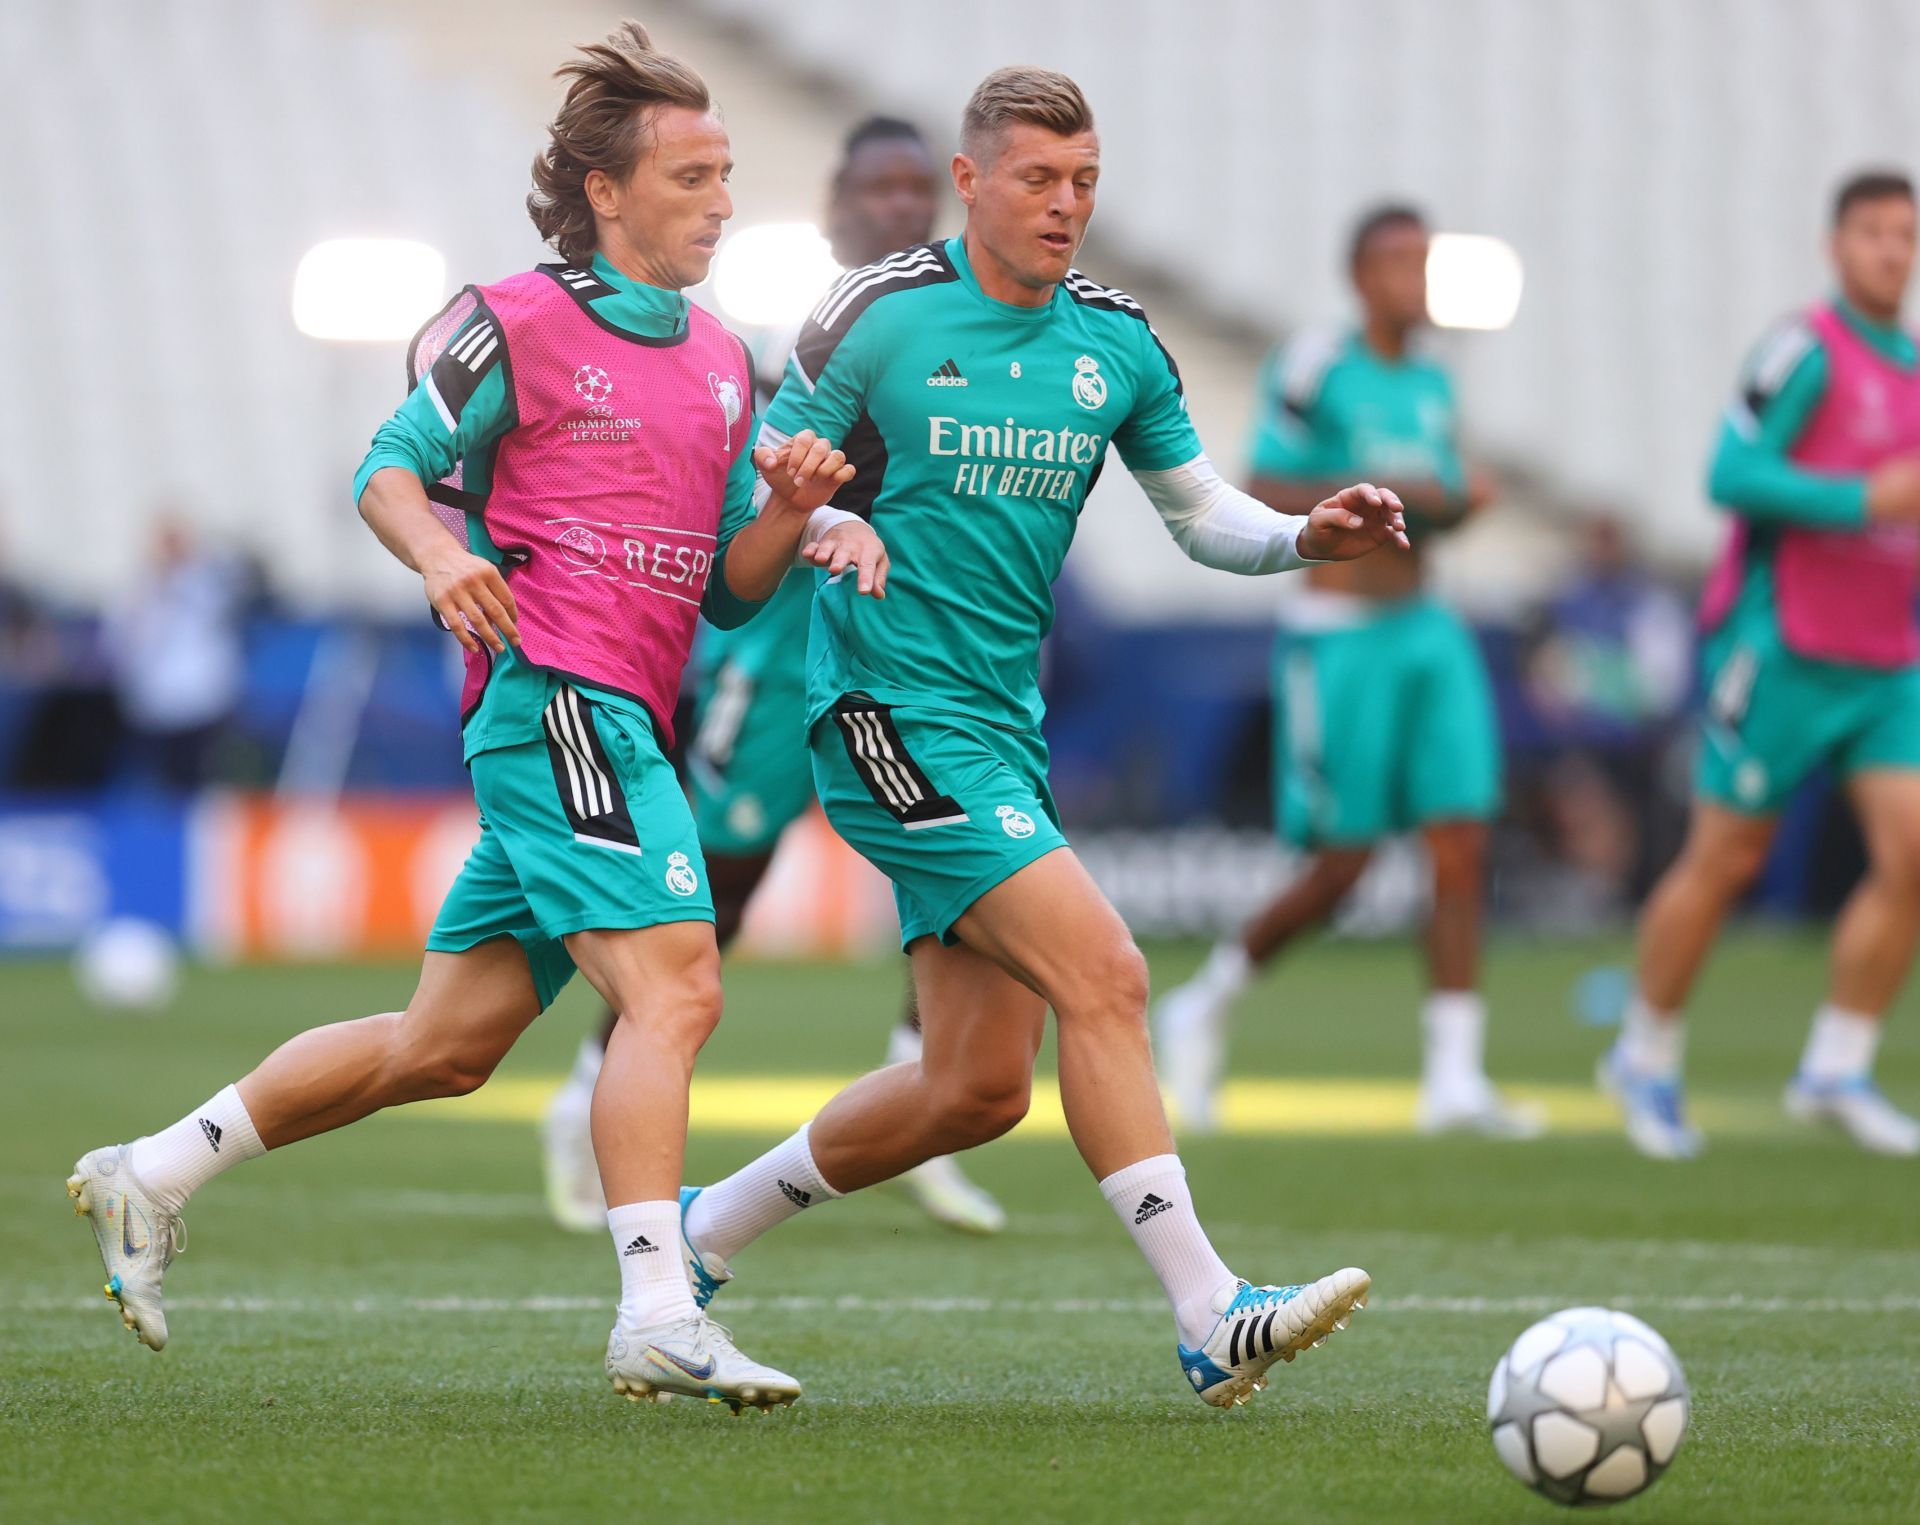 Luka Modric (left) and Toni Kroos (right) are veteran members of the Madrid squad.